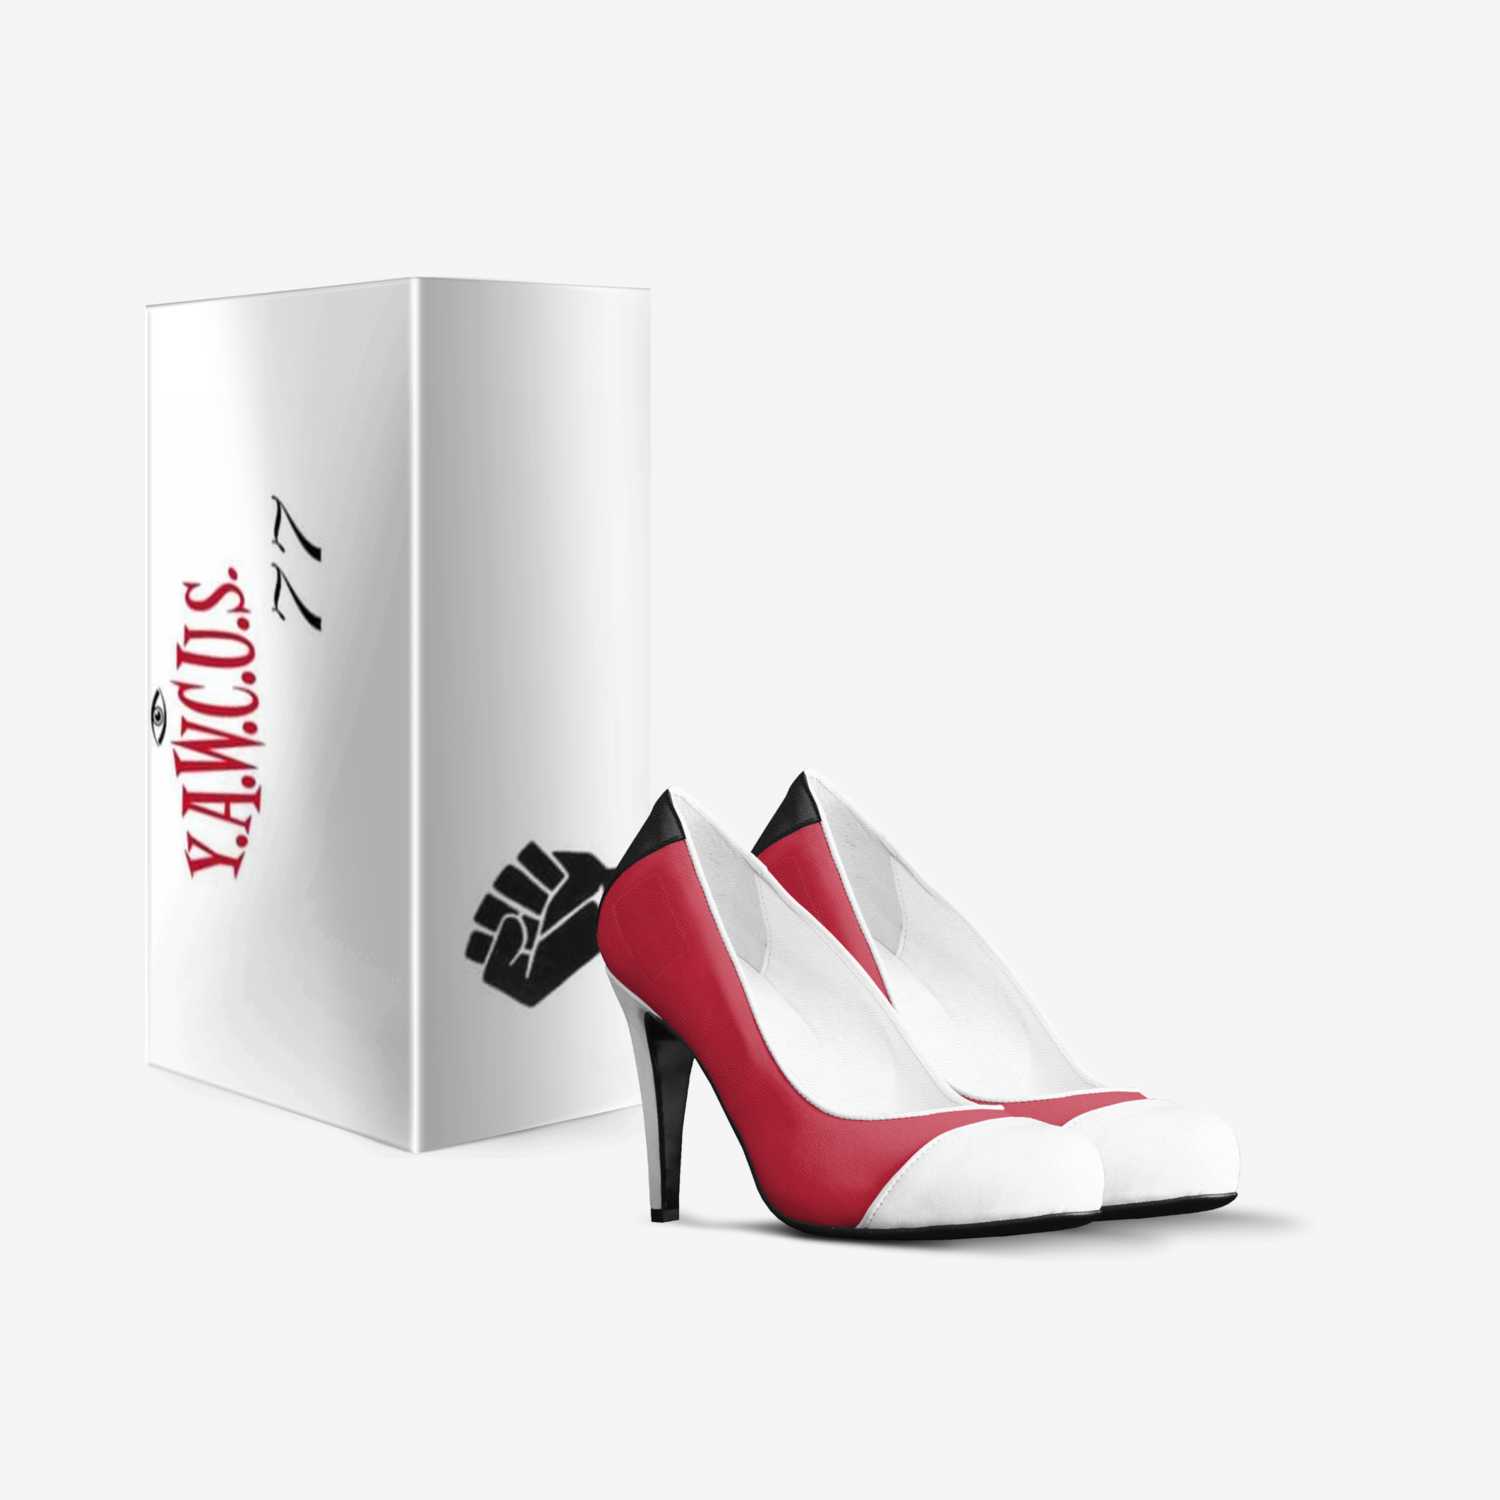 SHE_5 custom made in Italy shoes by Von Je | Box view